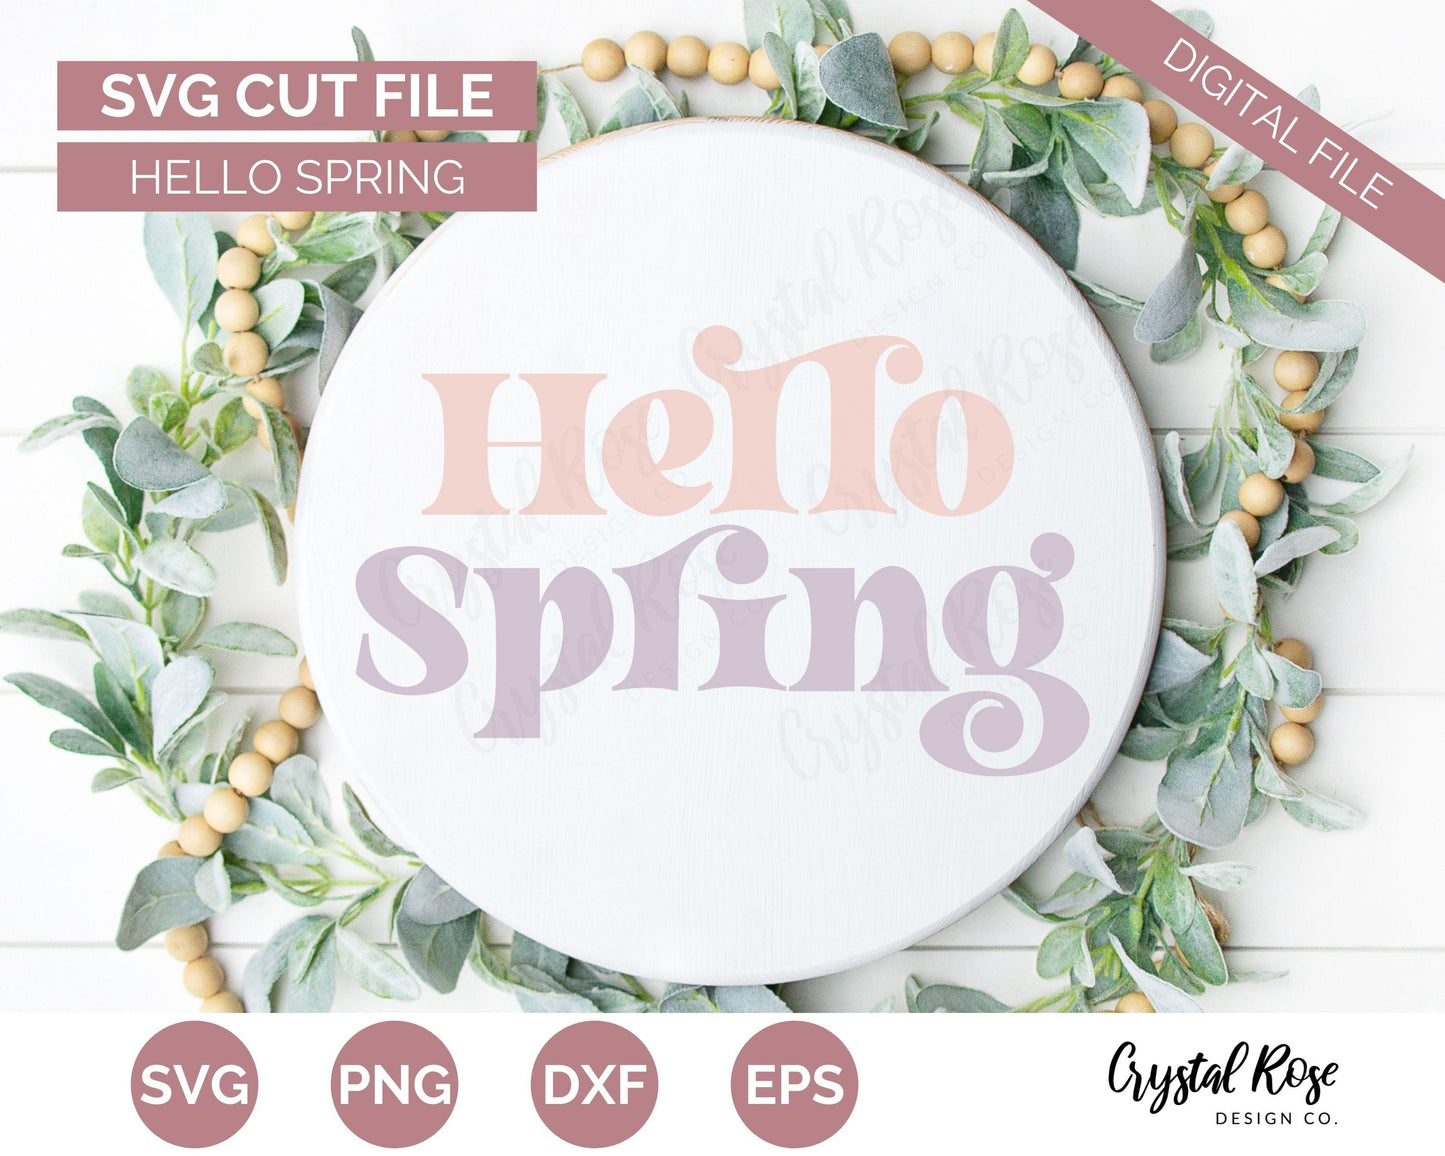 Hello Spring SVG, Easter SVG, Digital Download, Cricut, Silhouette, Glowforge (includes svg/png/dxf/eps)